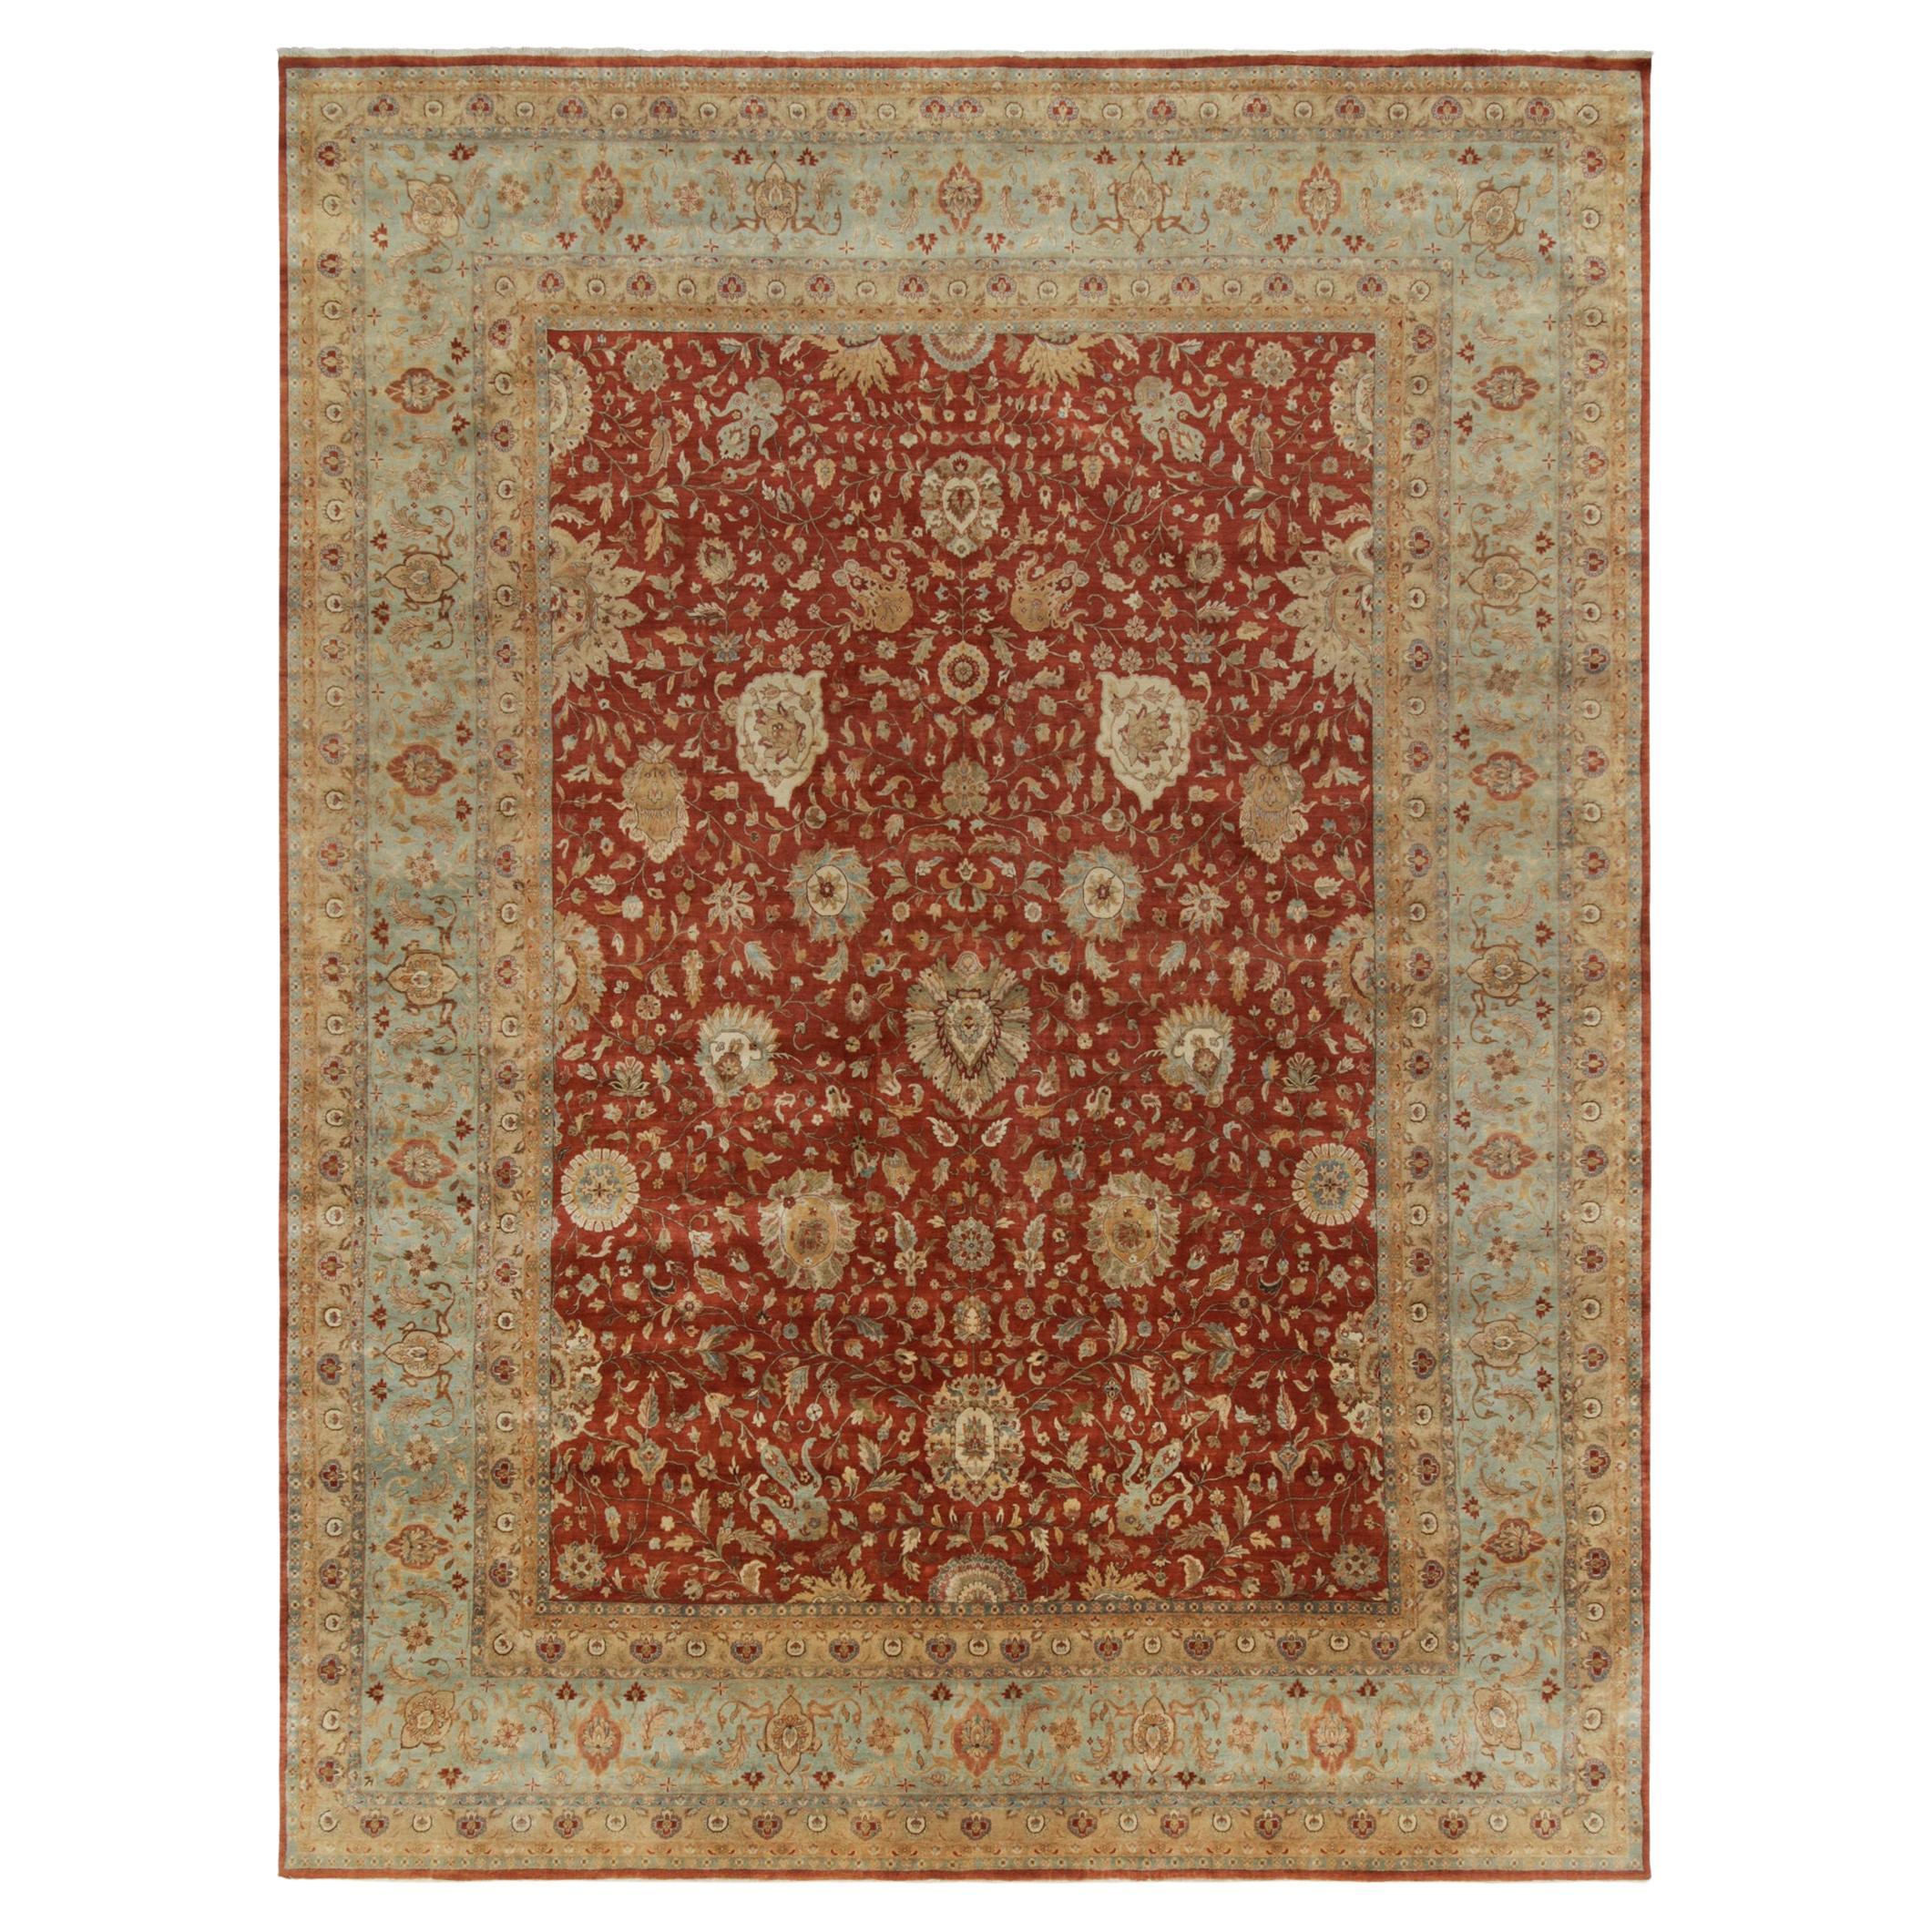 Rug & Kilim’s Classic Tabriz Style Rug with Beige & Blue Florals on Rust Red For Sale